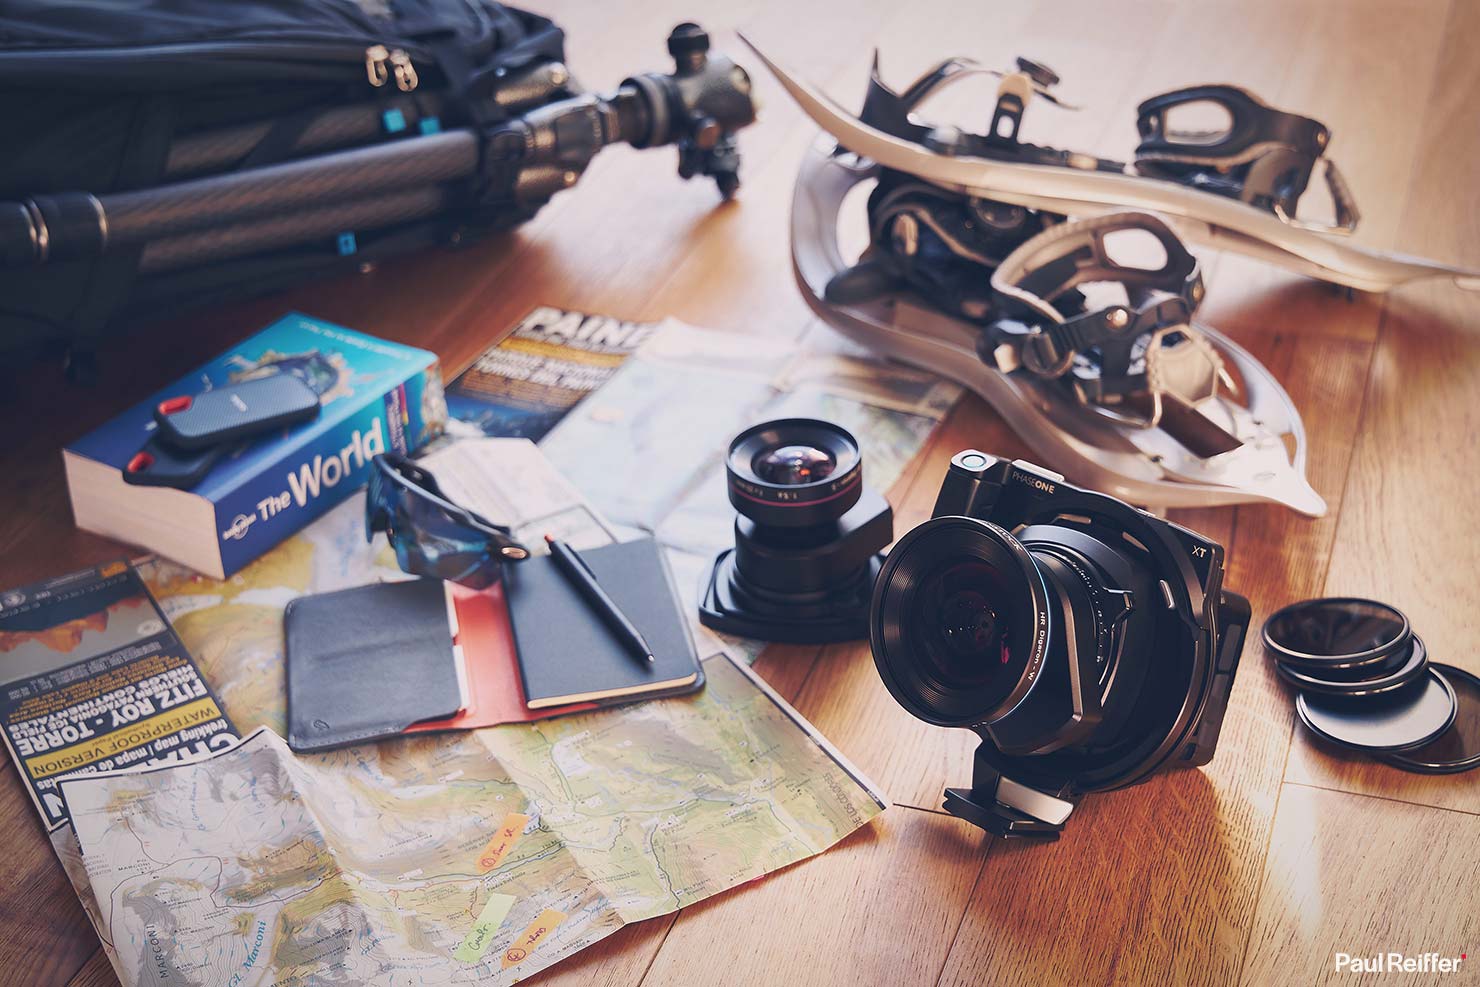 XT Camera Nya Evo Bag Background Expedition Kit Whats In Your Gear Paul Reiffer Phase One Photography